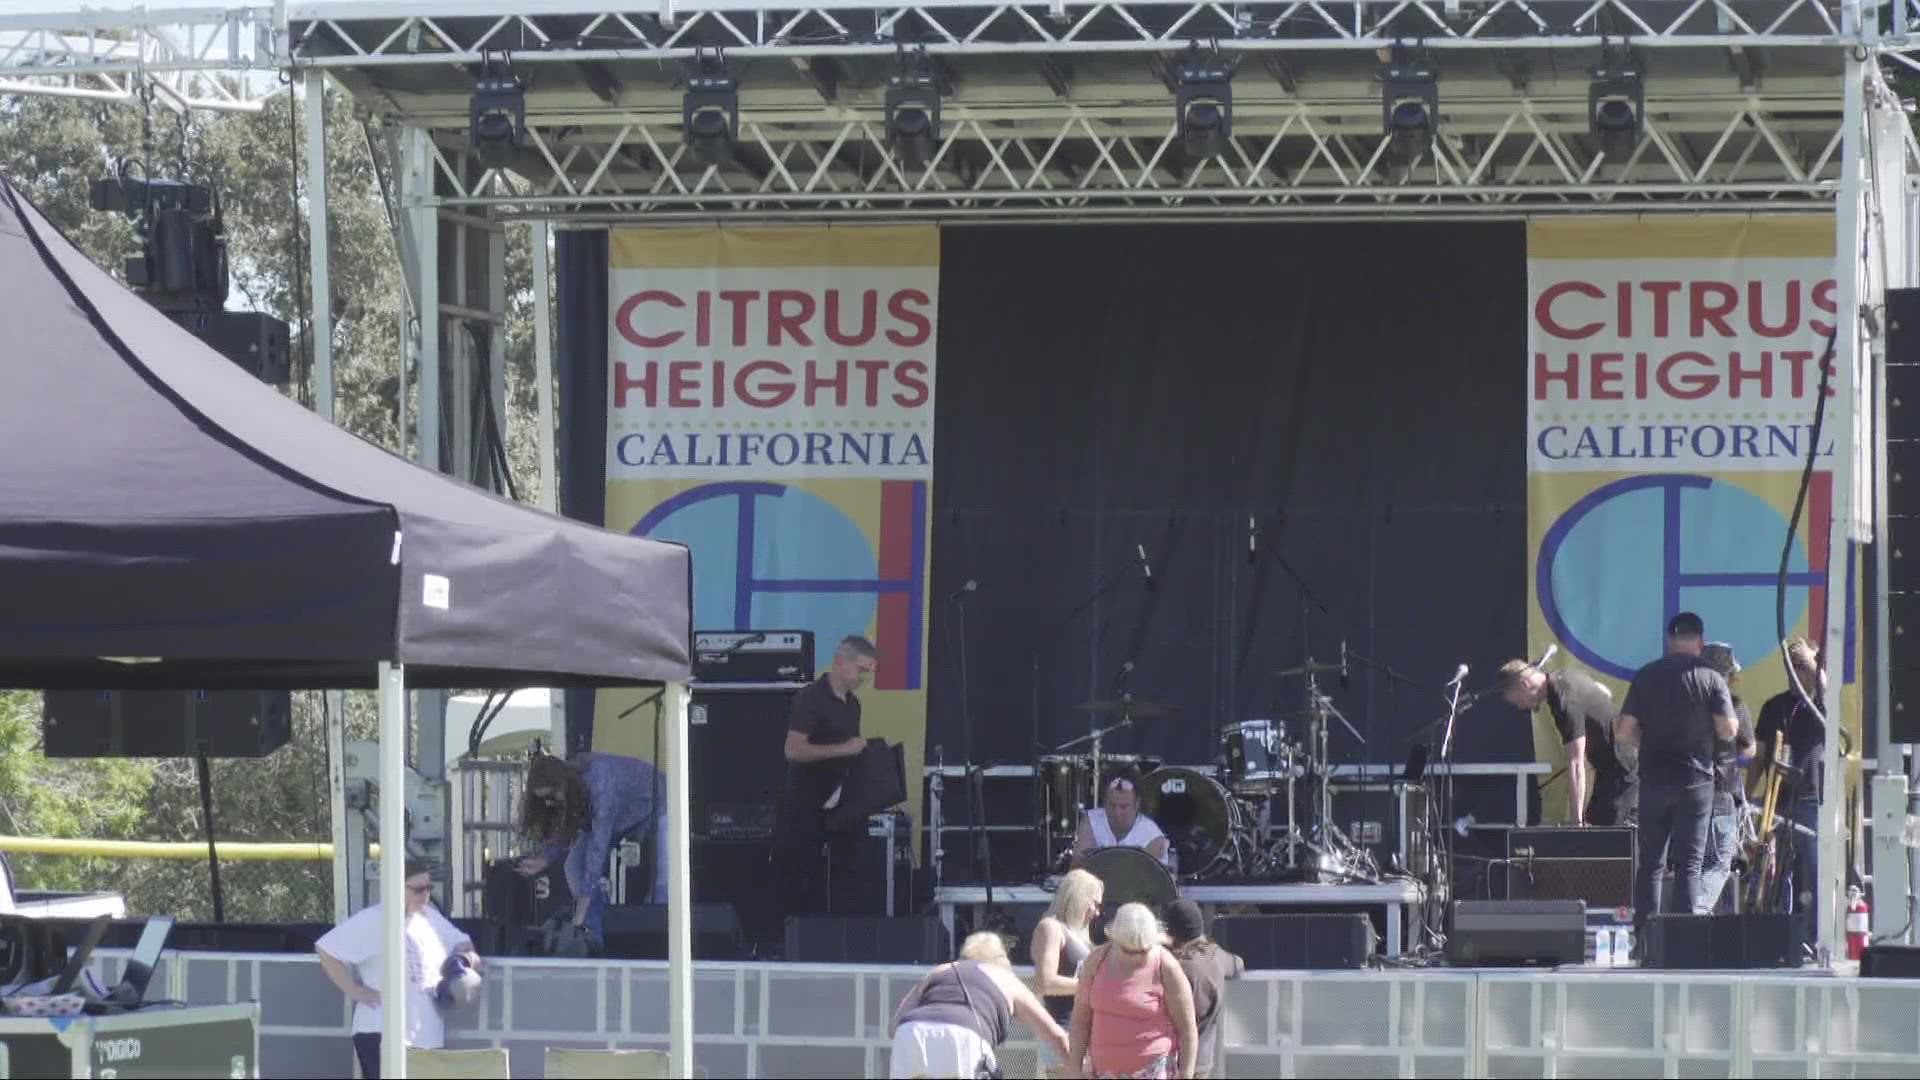 Hundreds of Citrus Heights residents celebrated the first Sunday Funday event in two years since the COVID-19 pandemic.